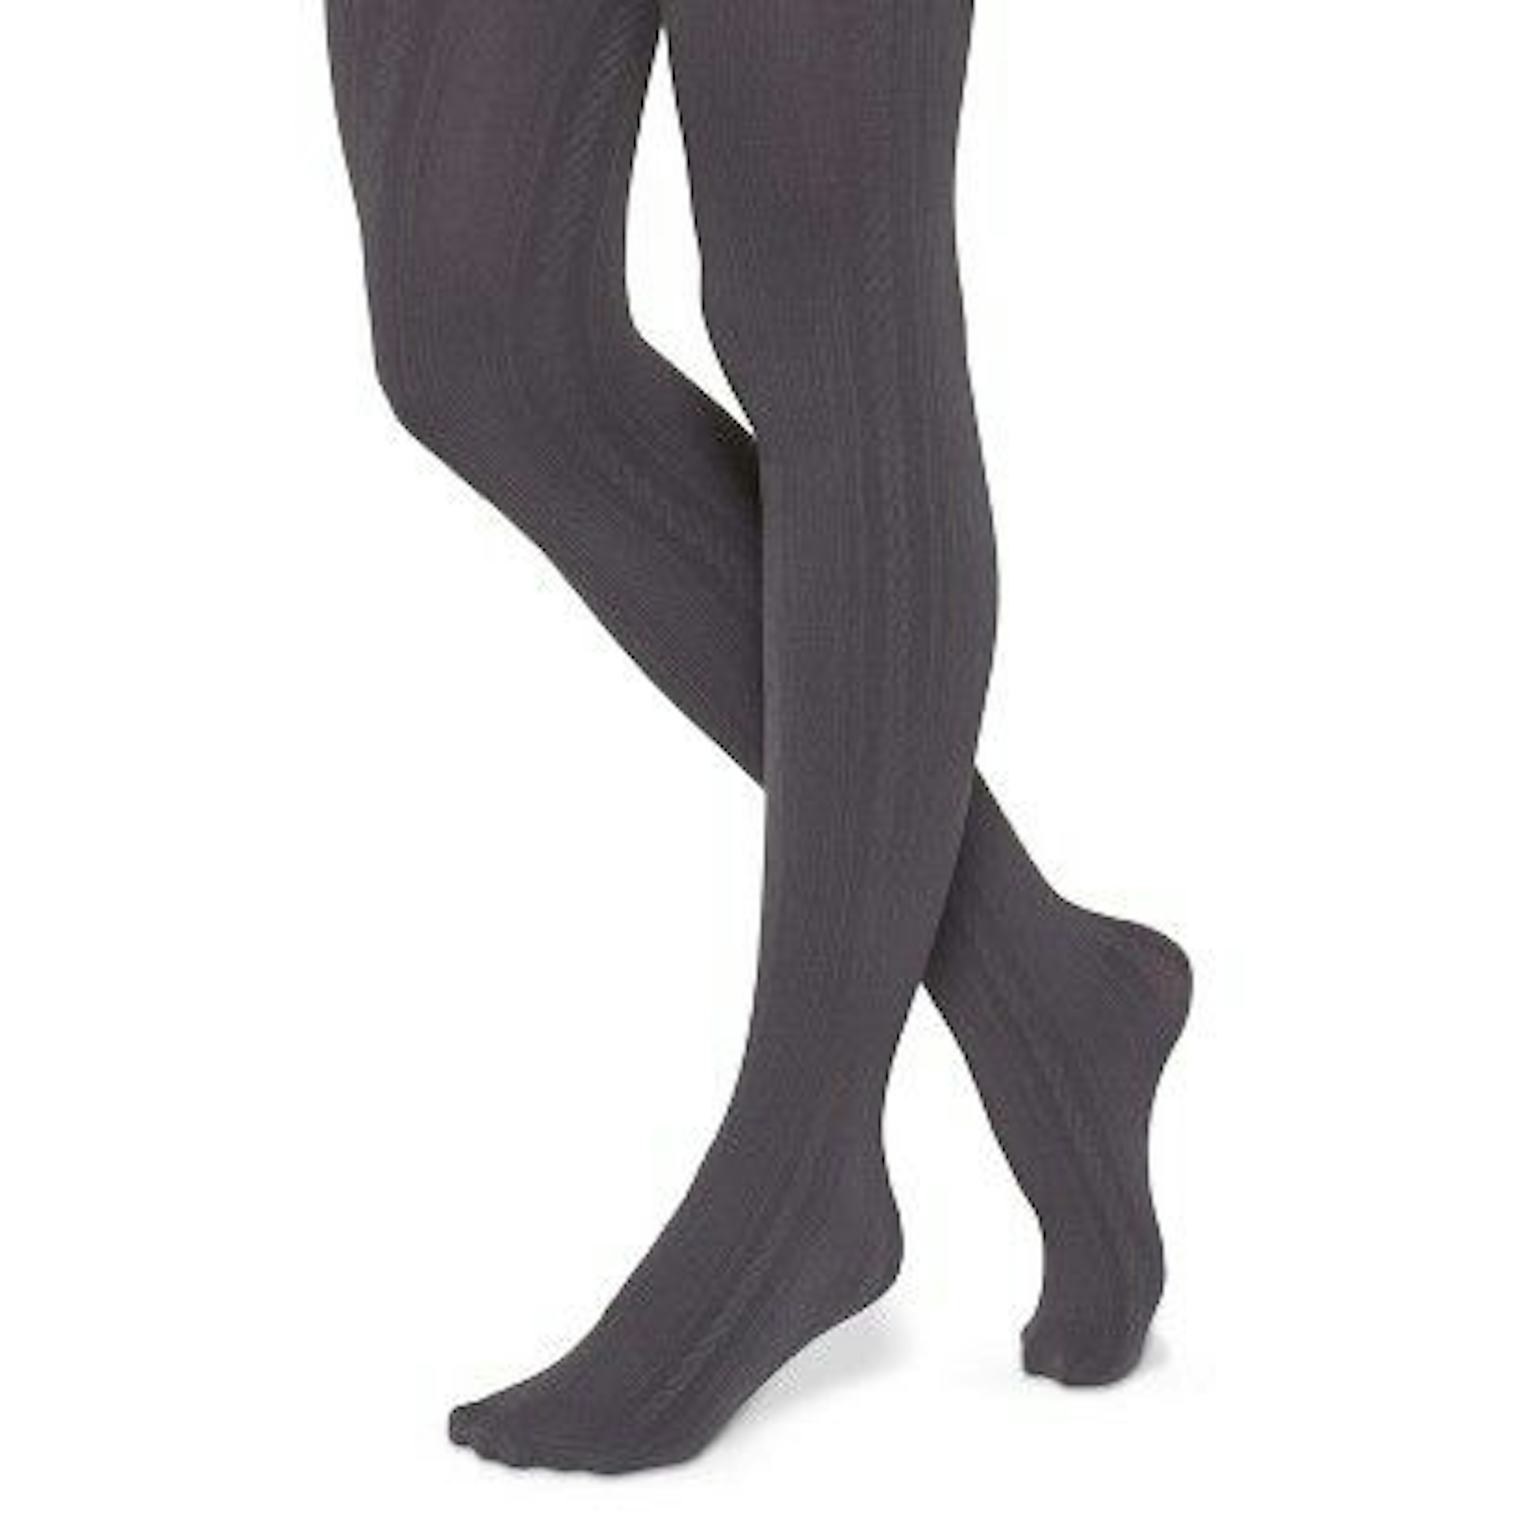 7 Warms Pairs Of Tights For People Who Are Always Cold